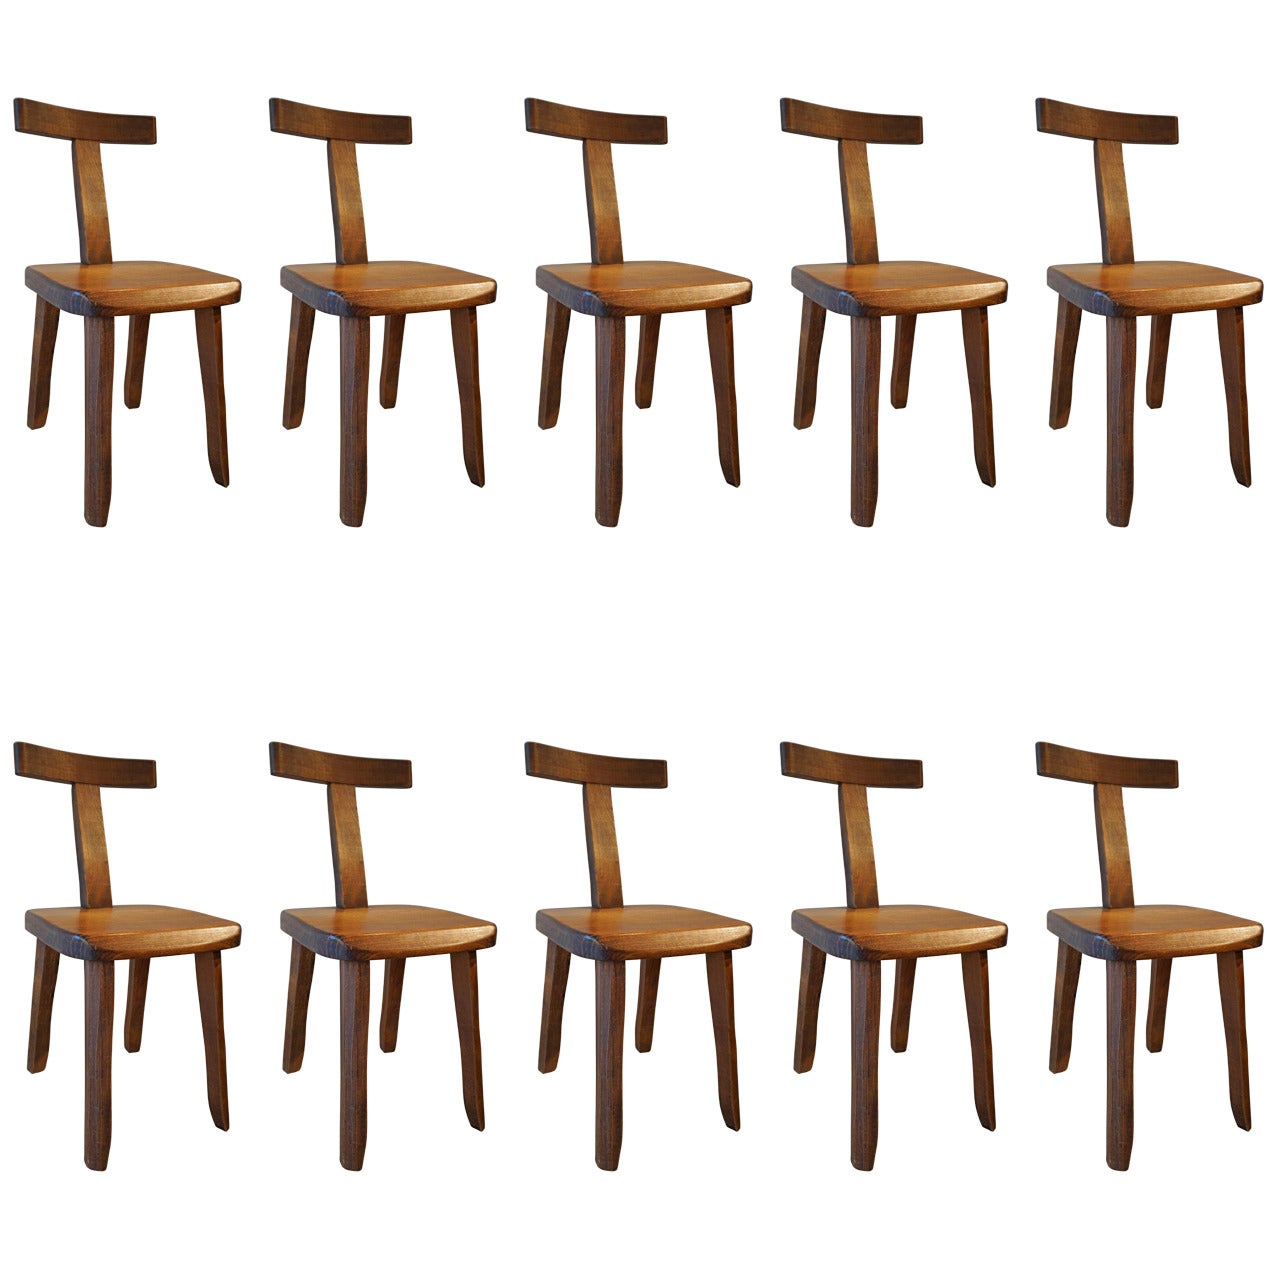 Set of Ten Dining Chairs by Olavi Hanninen